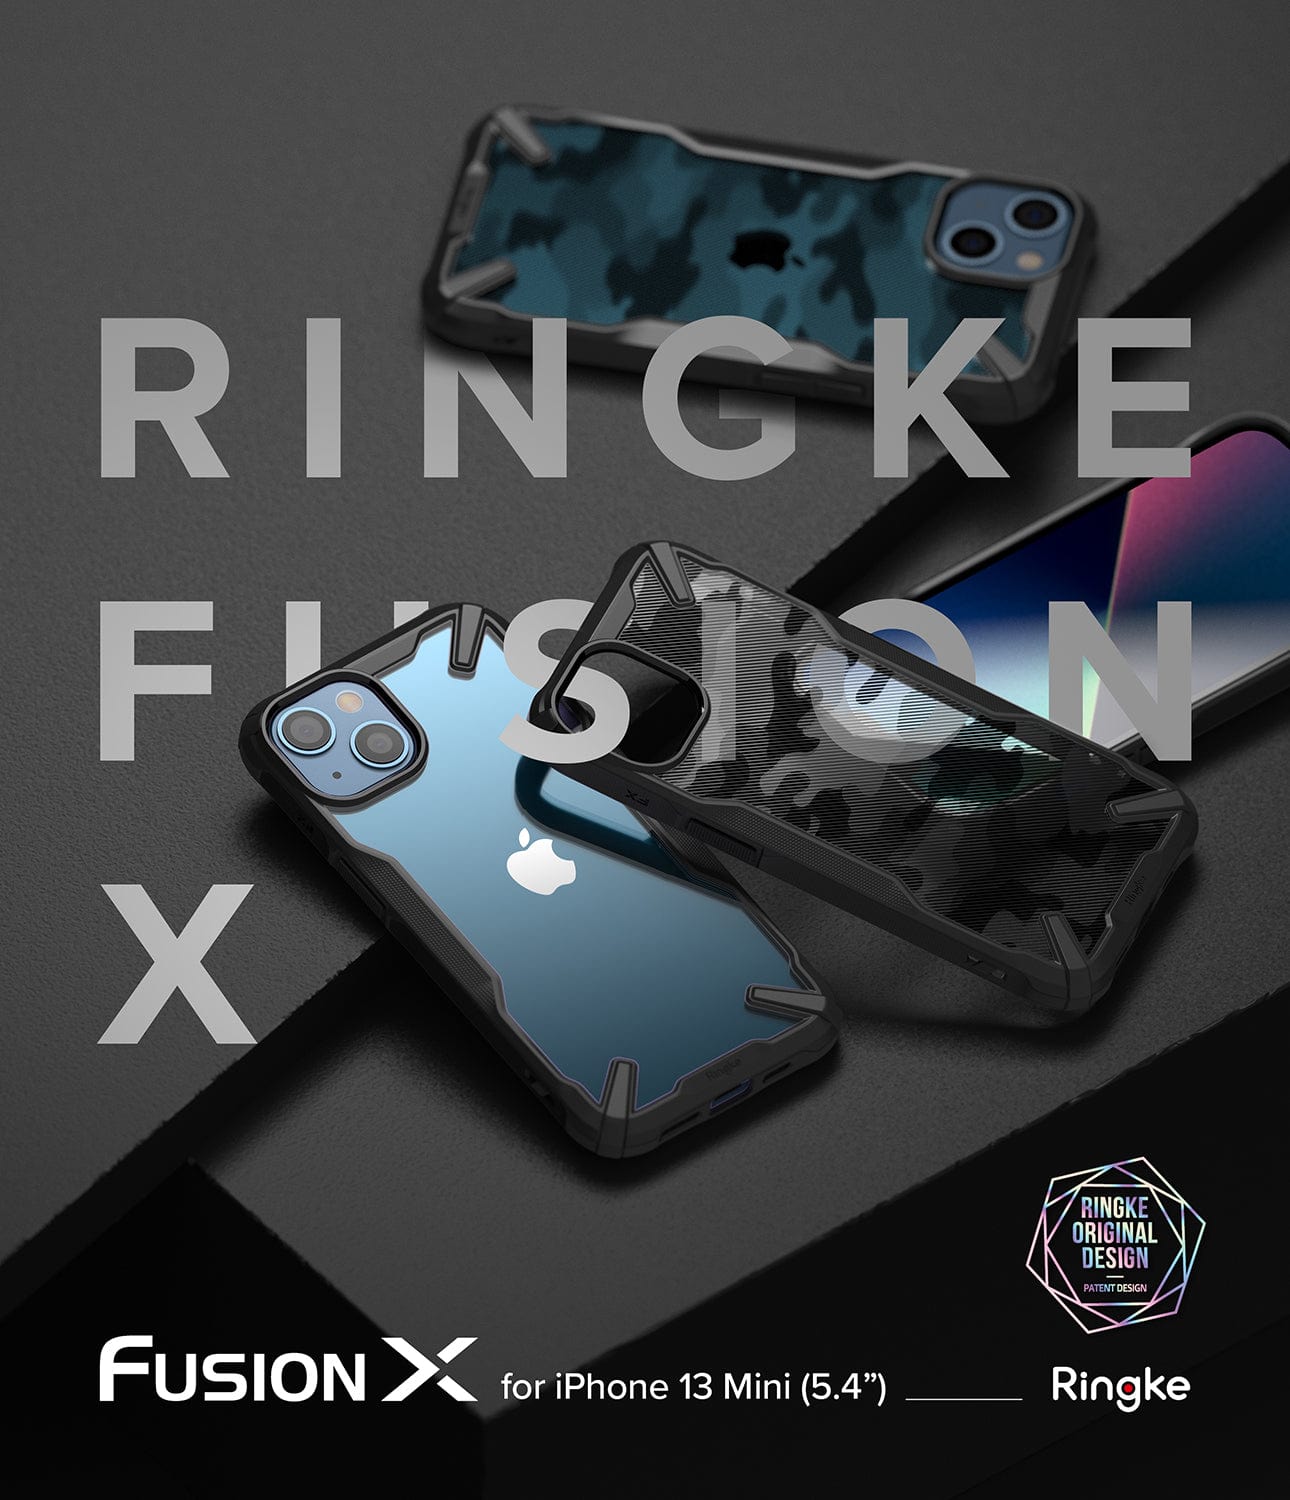 FusionX case for iPhone 13 Mini by Ringke